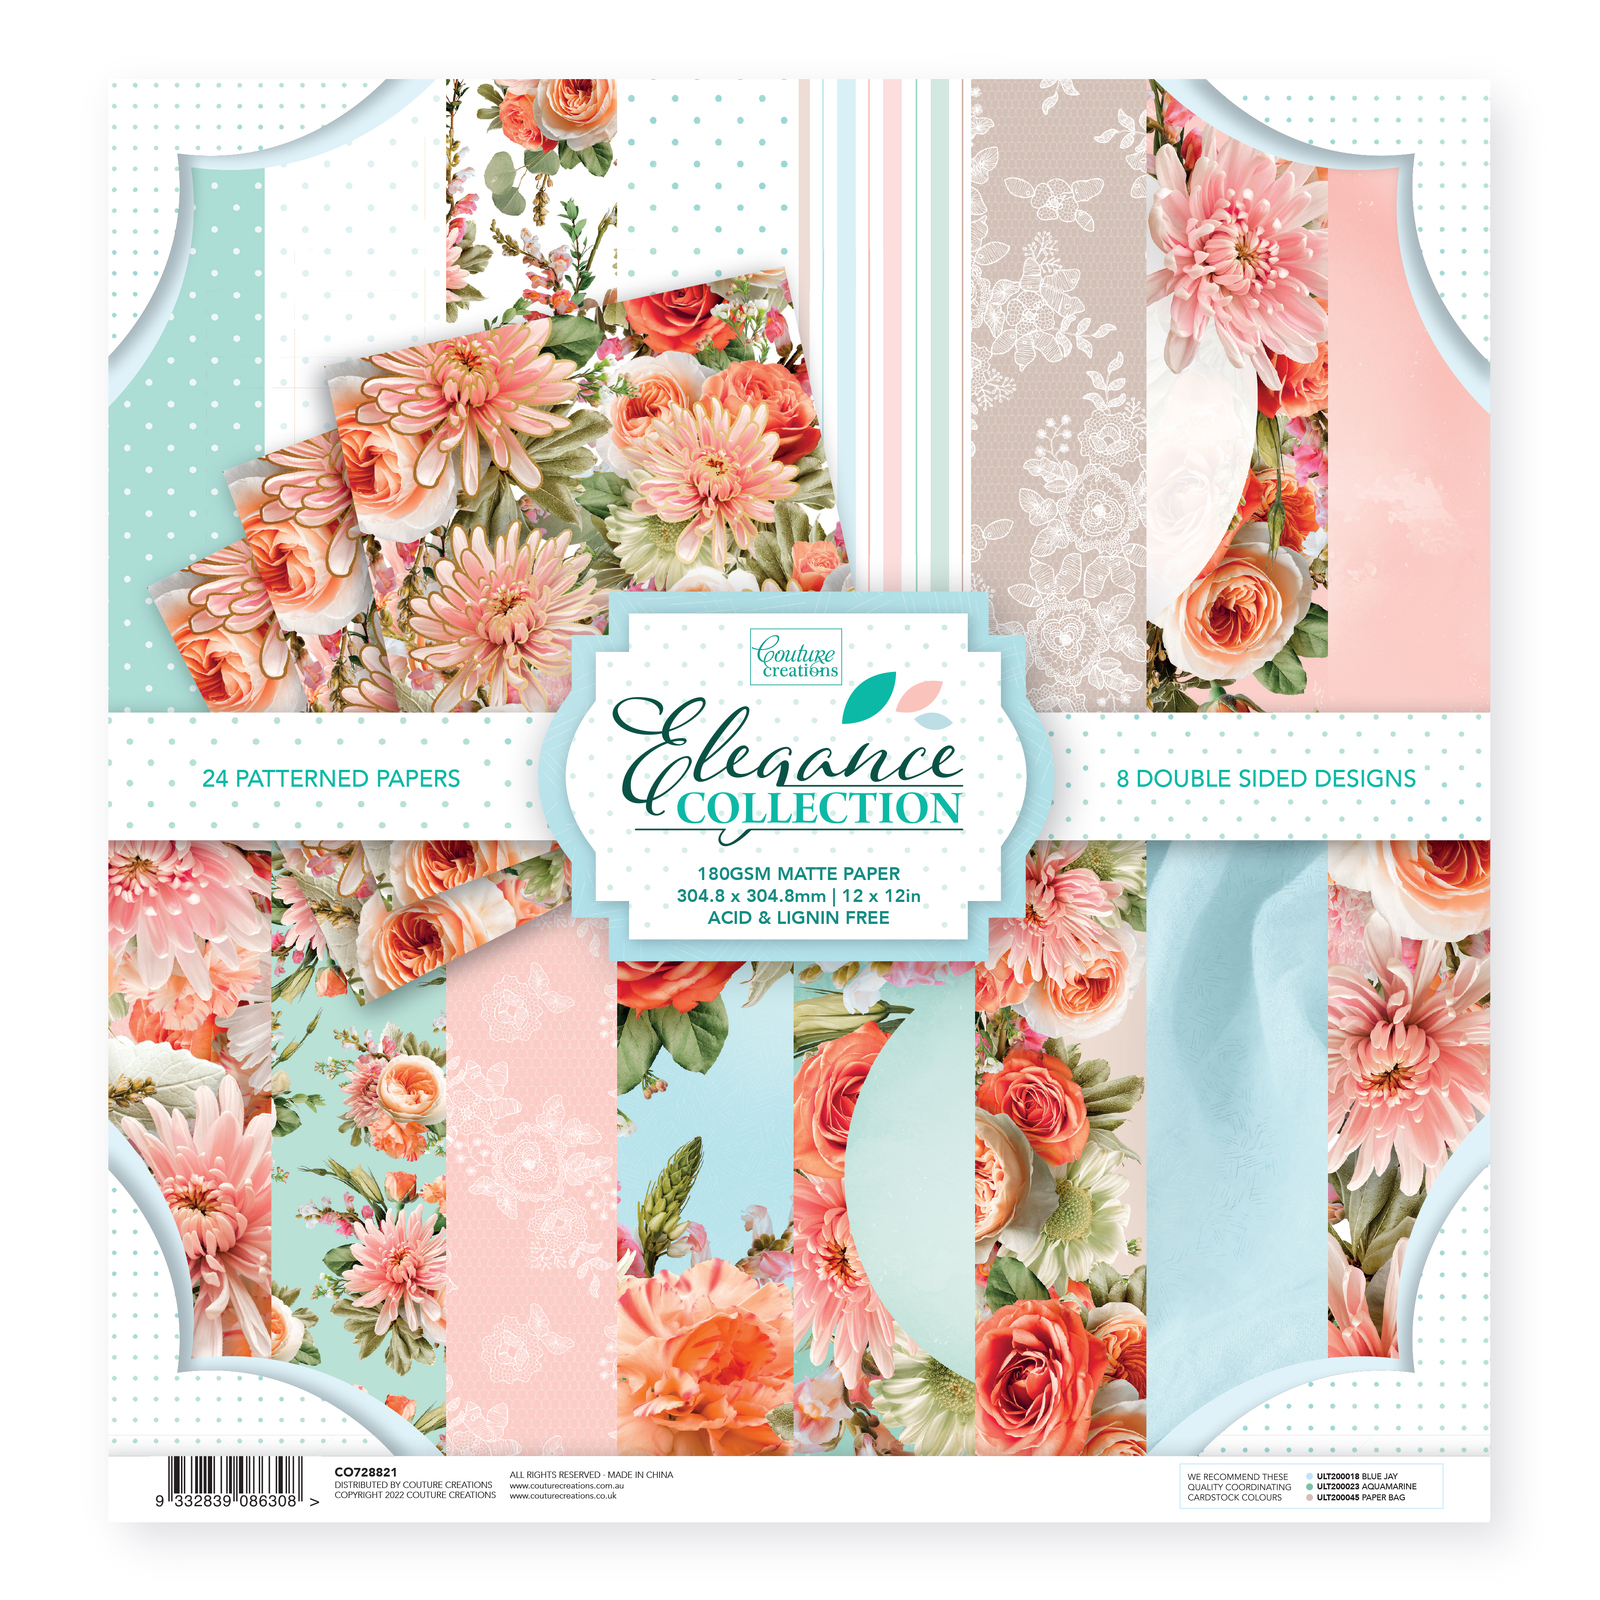 12x12 Couture Creations Elegance Collection Papers